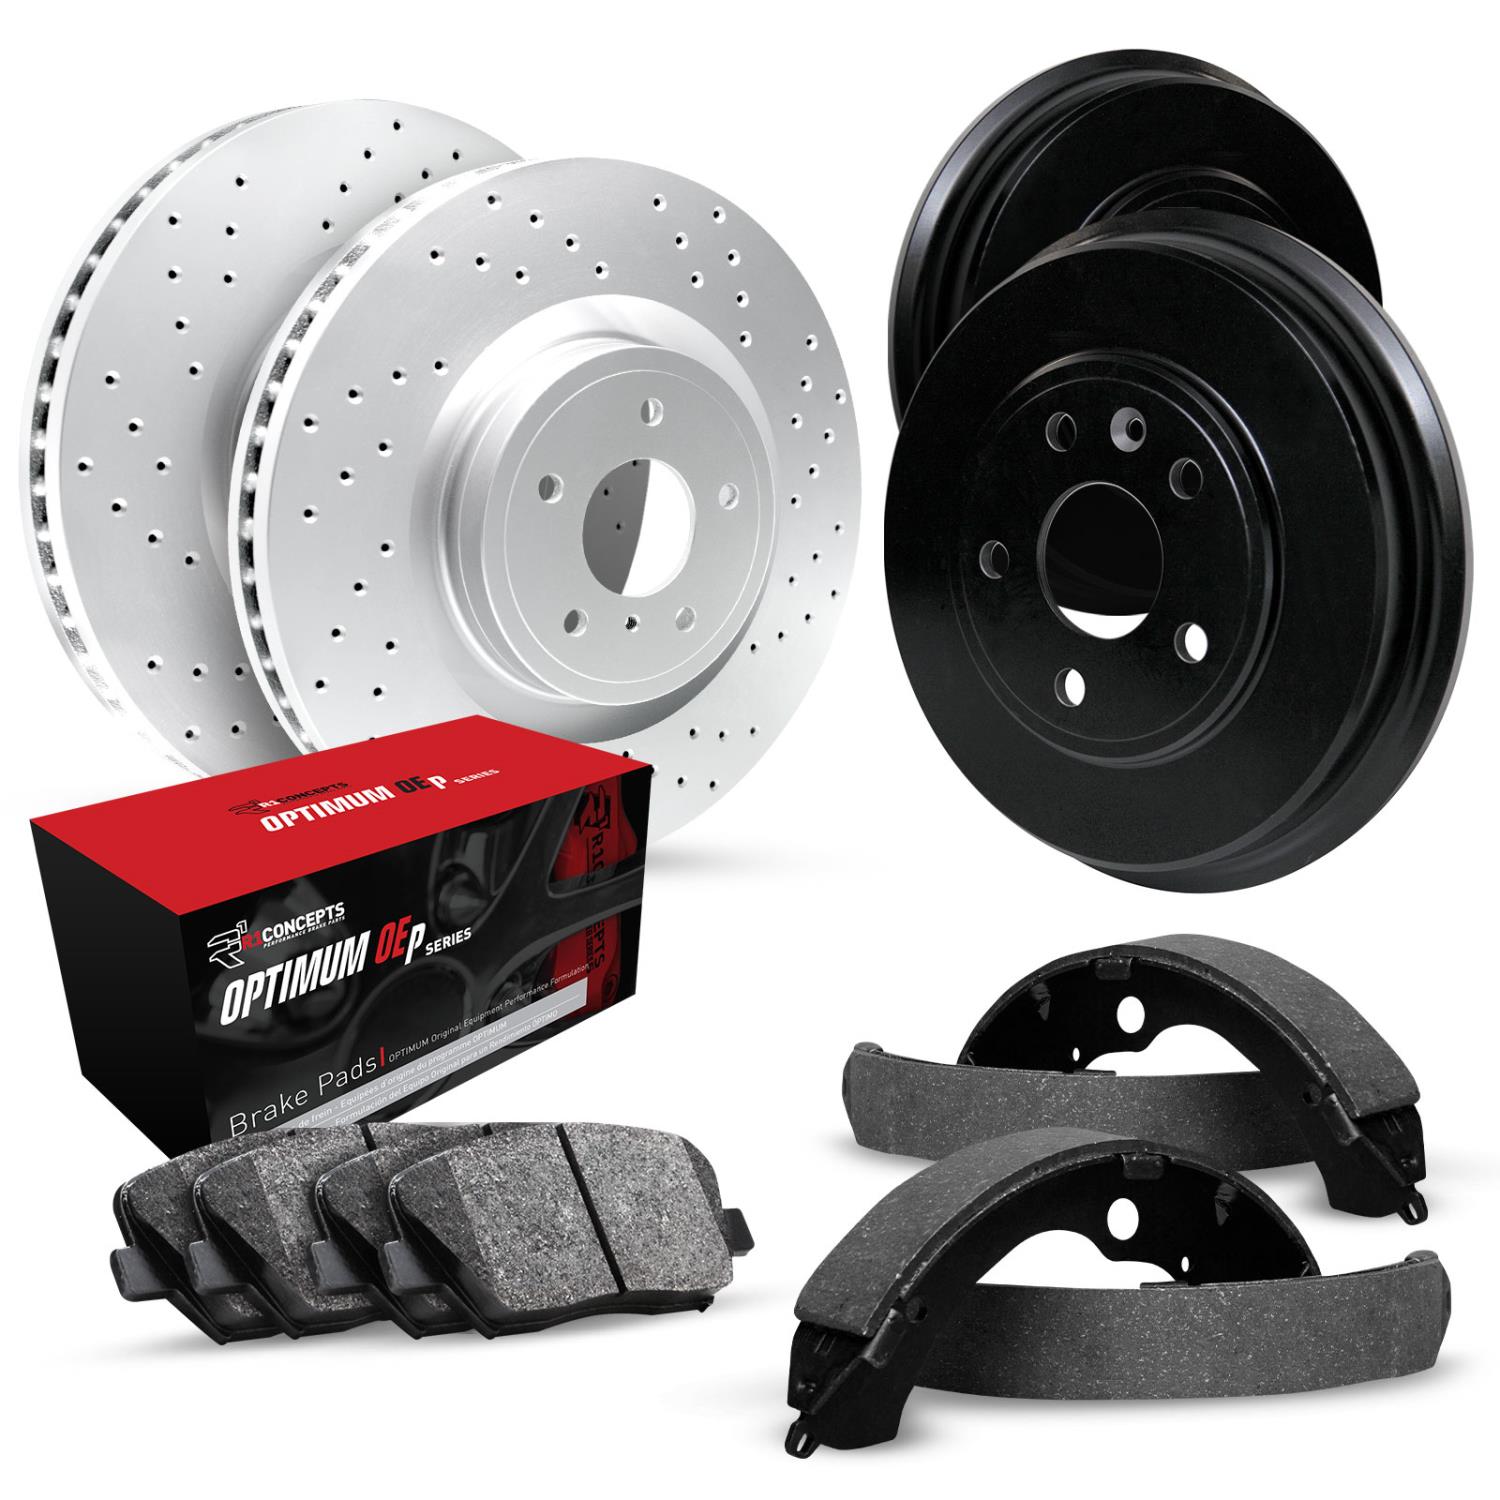 GEO-Carbon Drilled Brake Rotor & Drum Set w/Optimum OE Pads & Shoes, 1973-1973 GM, Position: Front & Rear